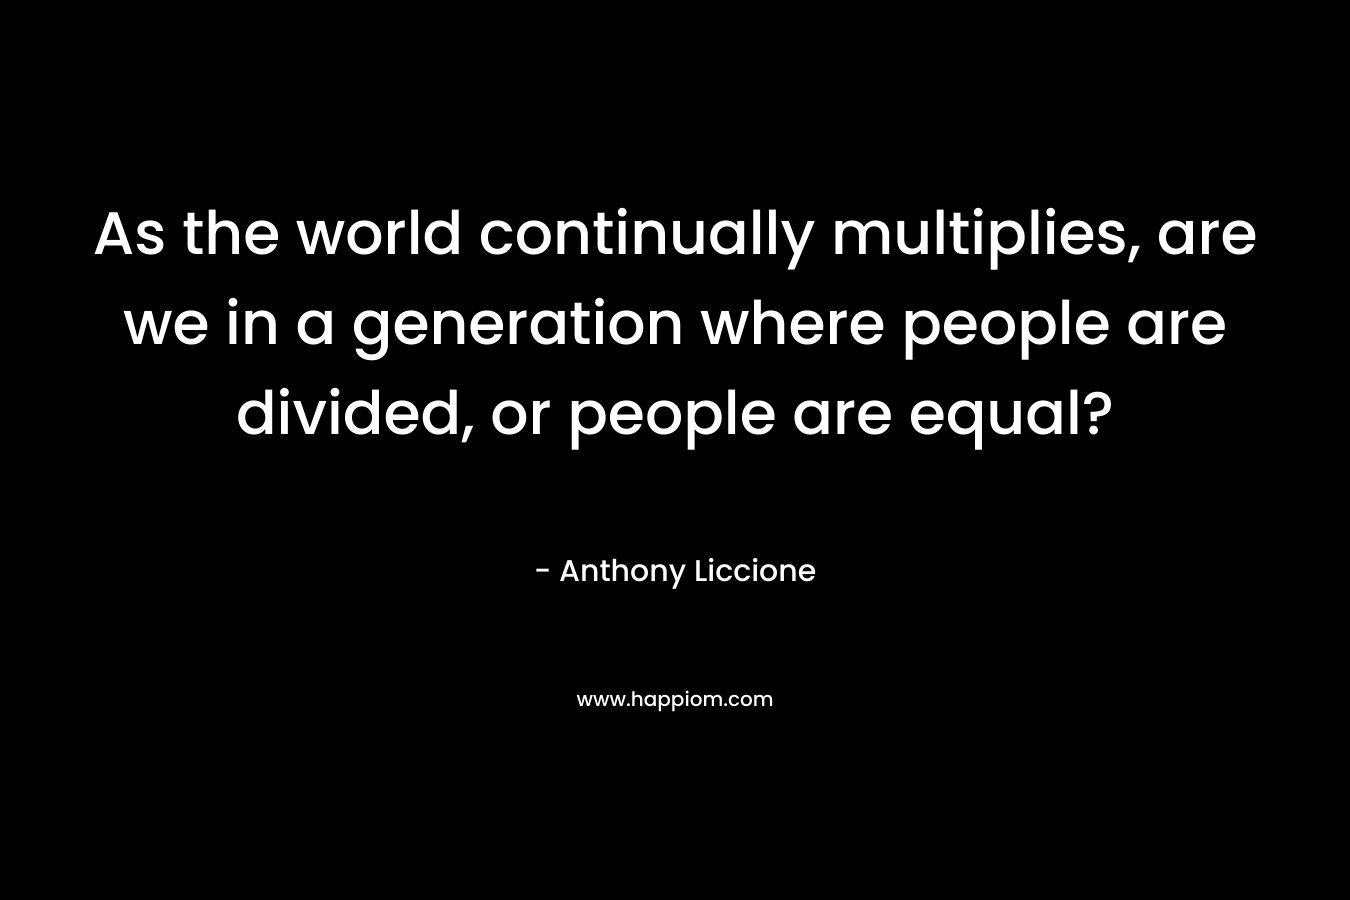 As the world continually multiplies, are we in a generation where people are divided, or people are equal? – Anthony Liccione